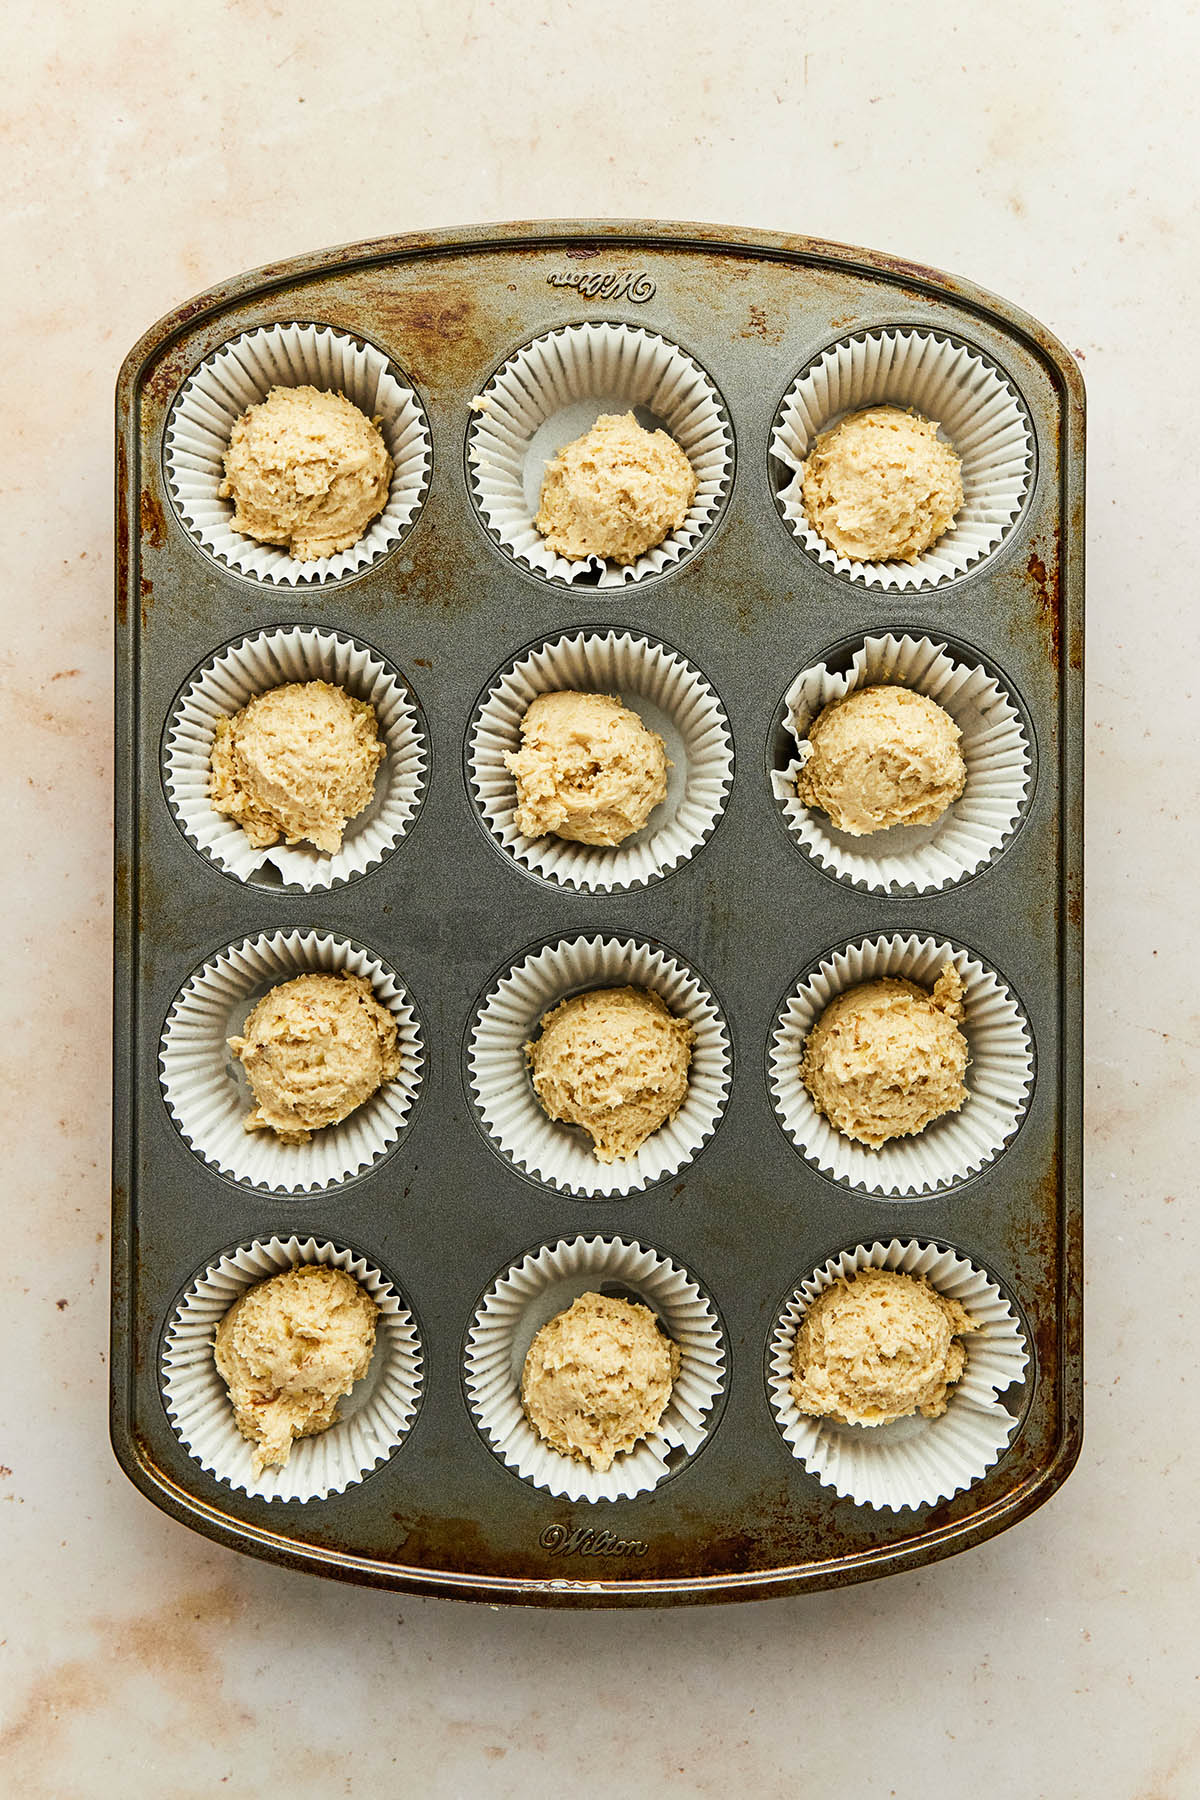 Scoops of banana muffin batter in a metal muffin tin lined with paper cupcake wrappers.